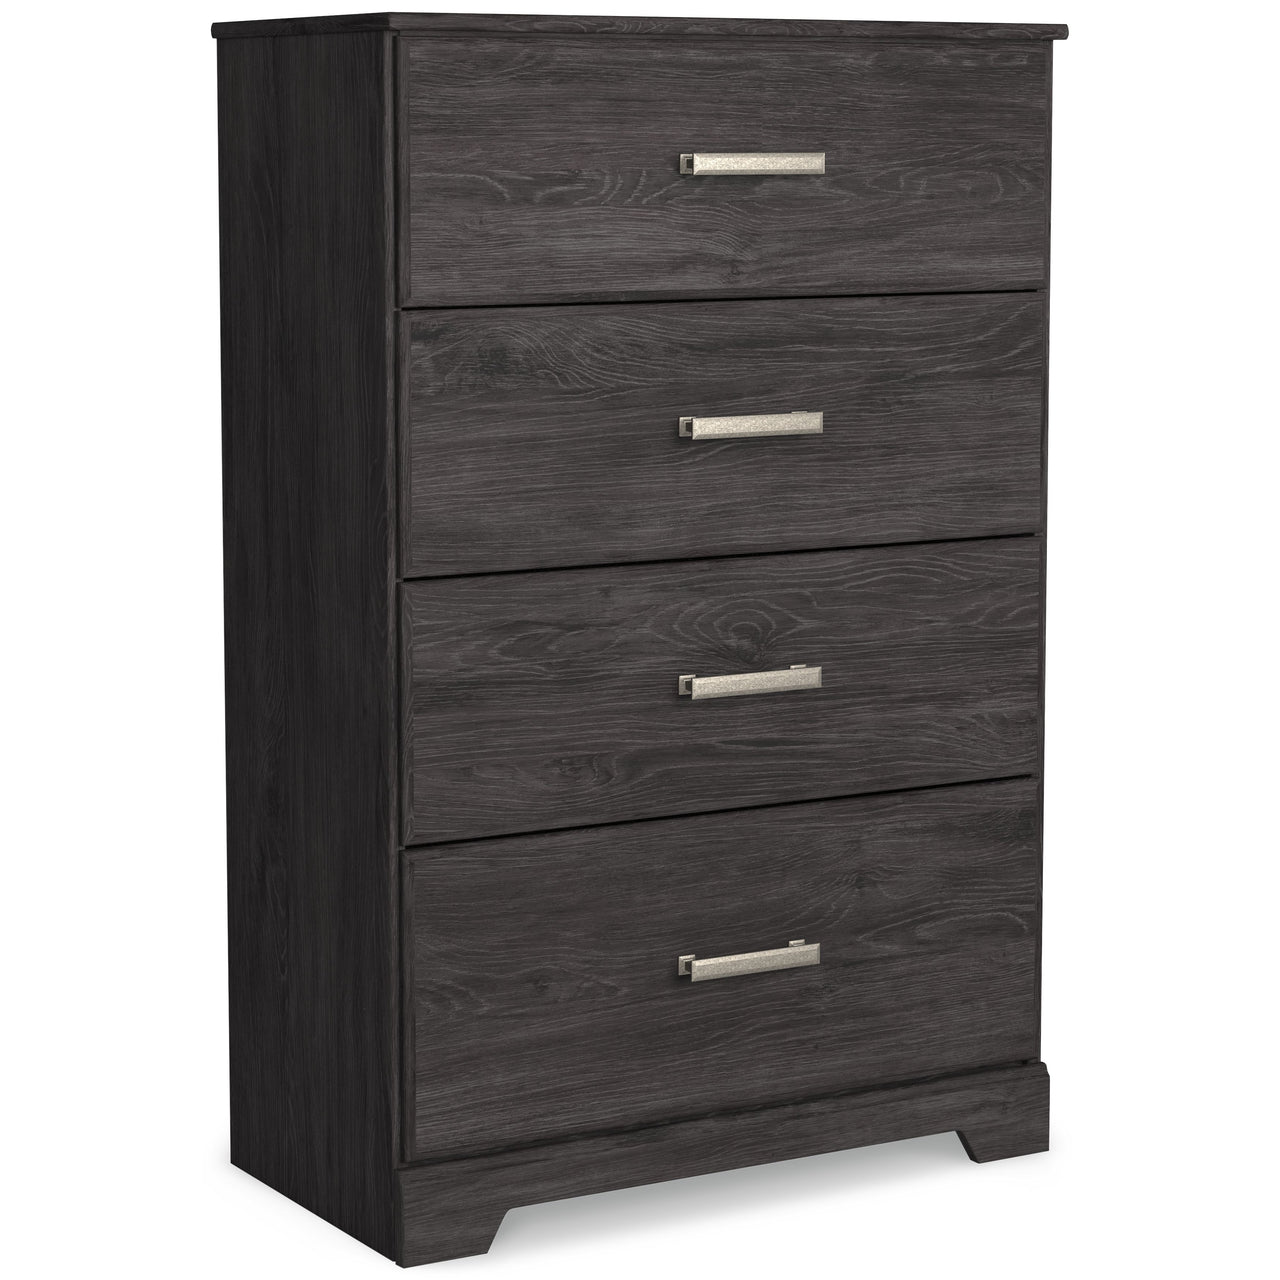 Belachime - Black - Four Drawer Chest Tony's Home Furnishings Furniture. Beds. Dressers. Sofas.